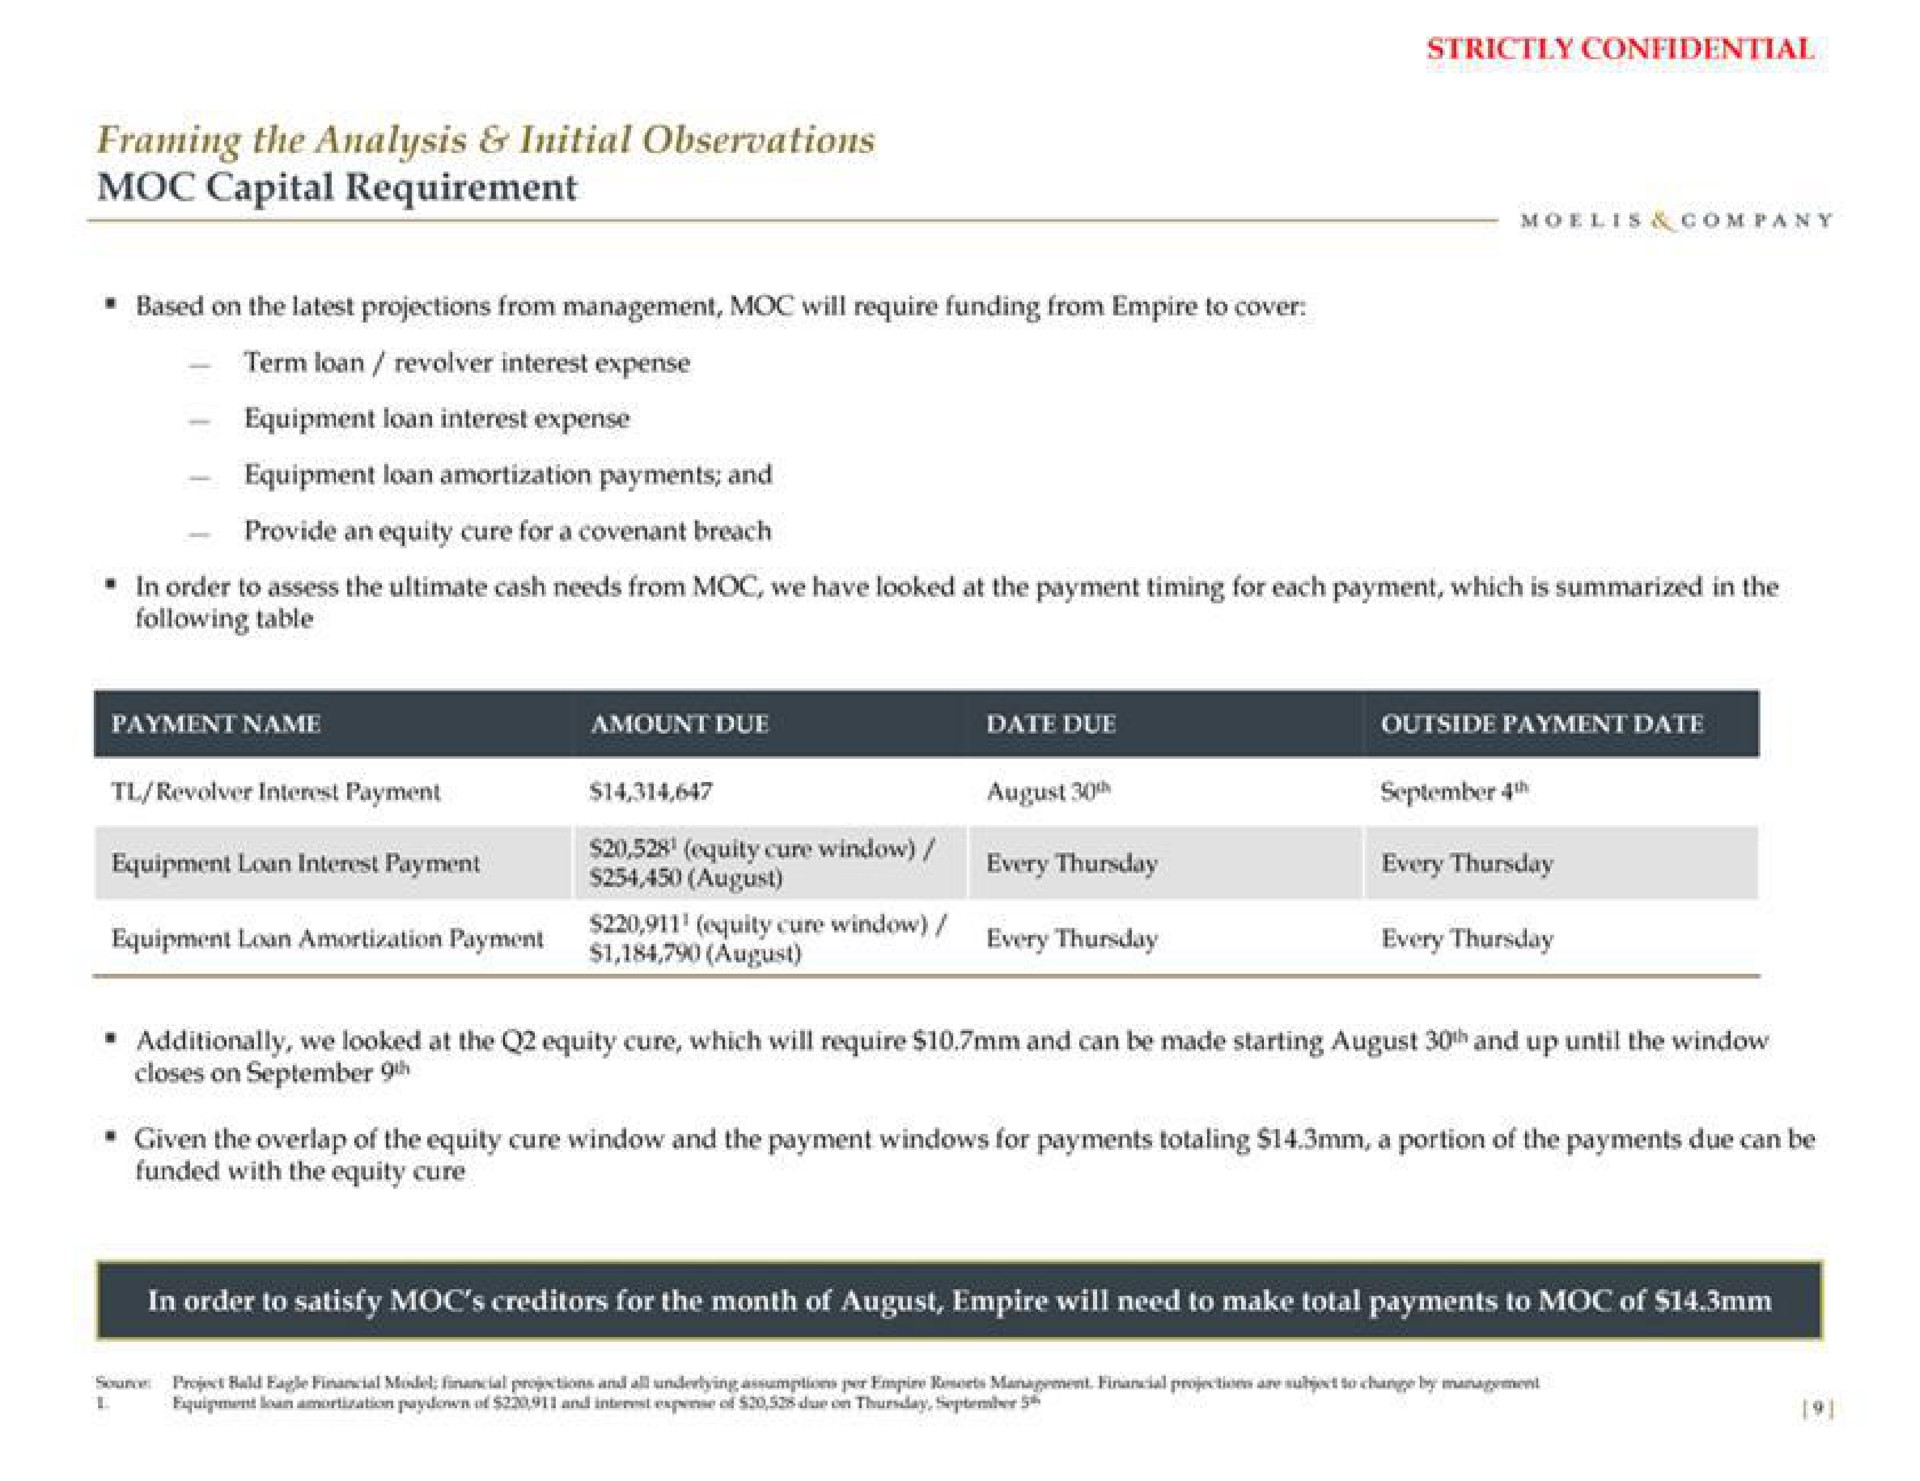 framing the analysis initial observations capital requirement august brey teeny | Moelis & Company